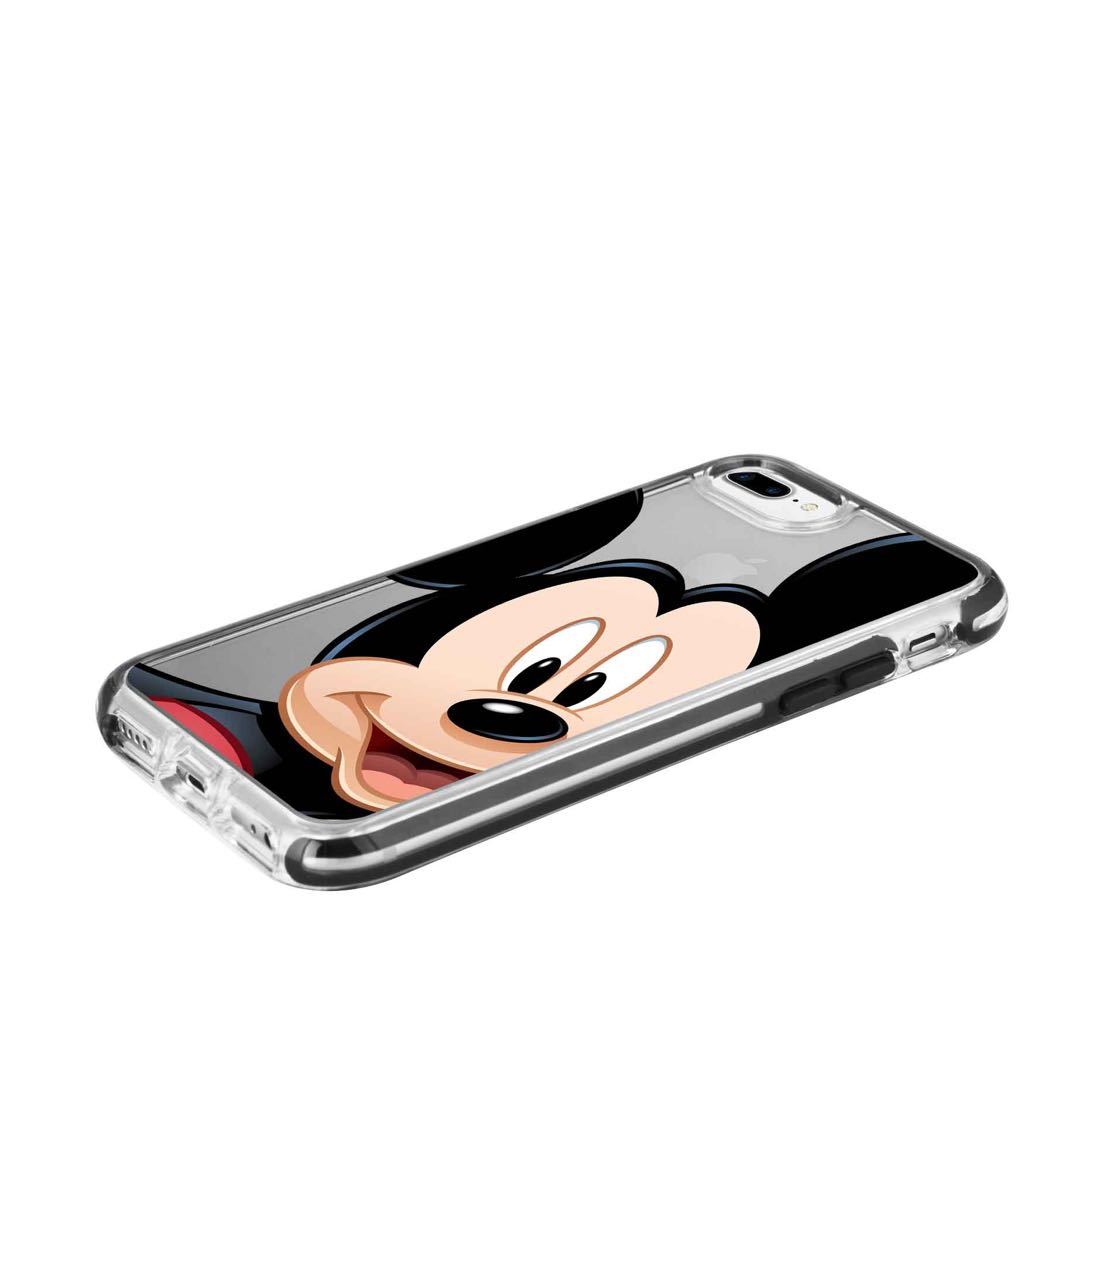 Zoom Up Mickey - Extreme Phone Case for iPhone 7 Plus